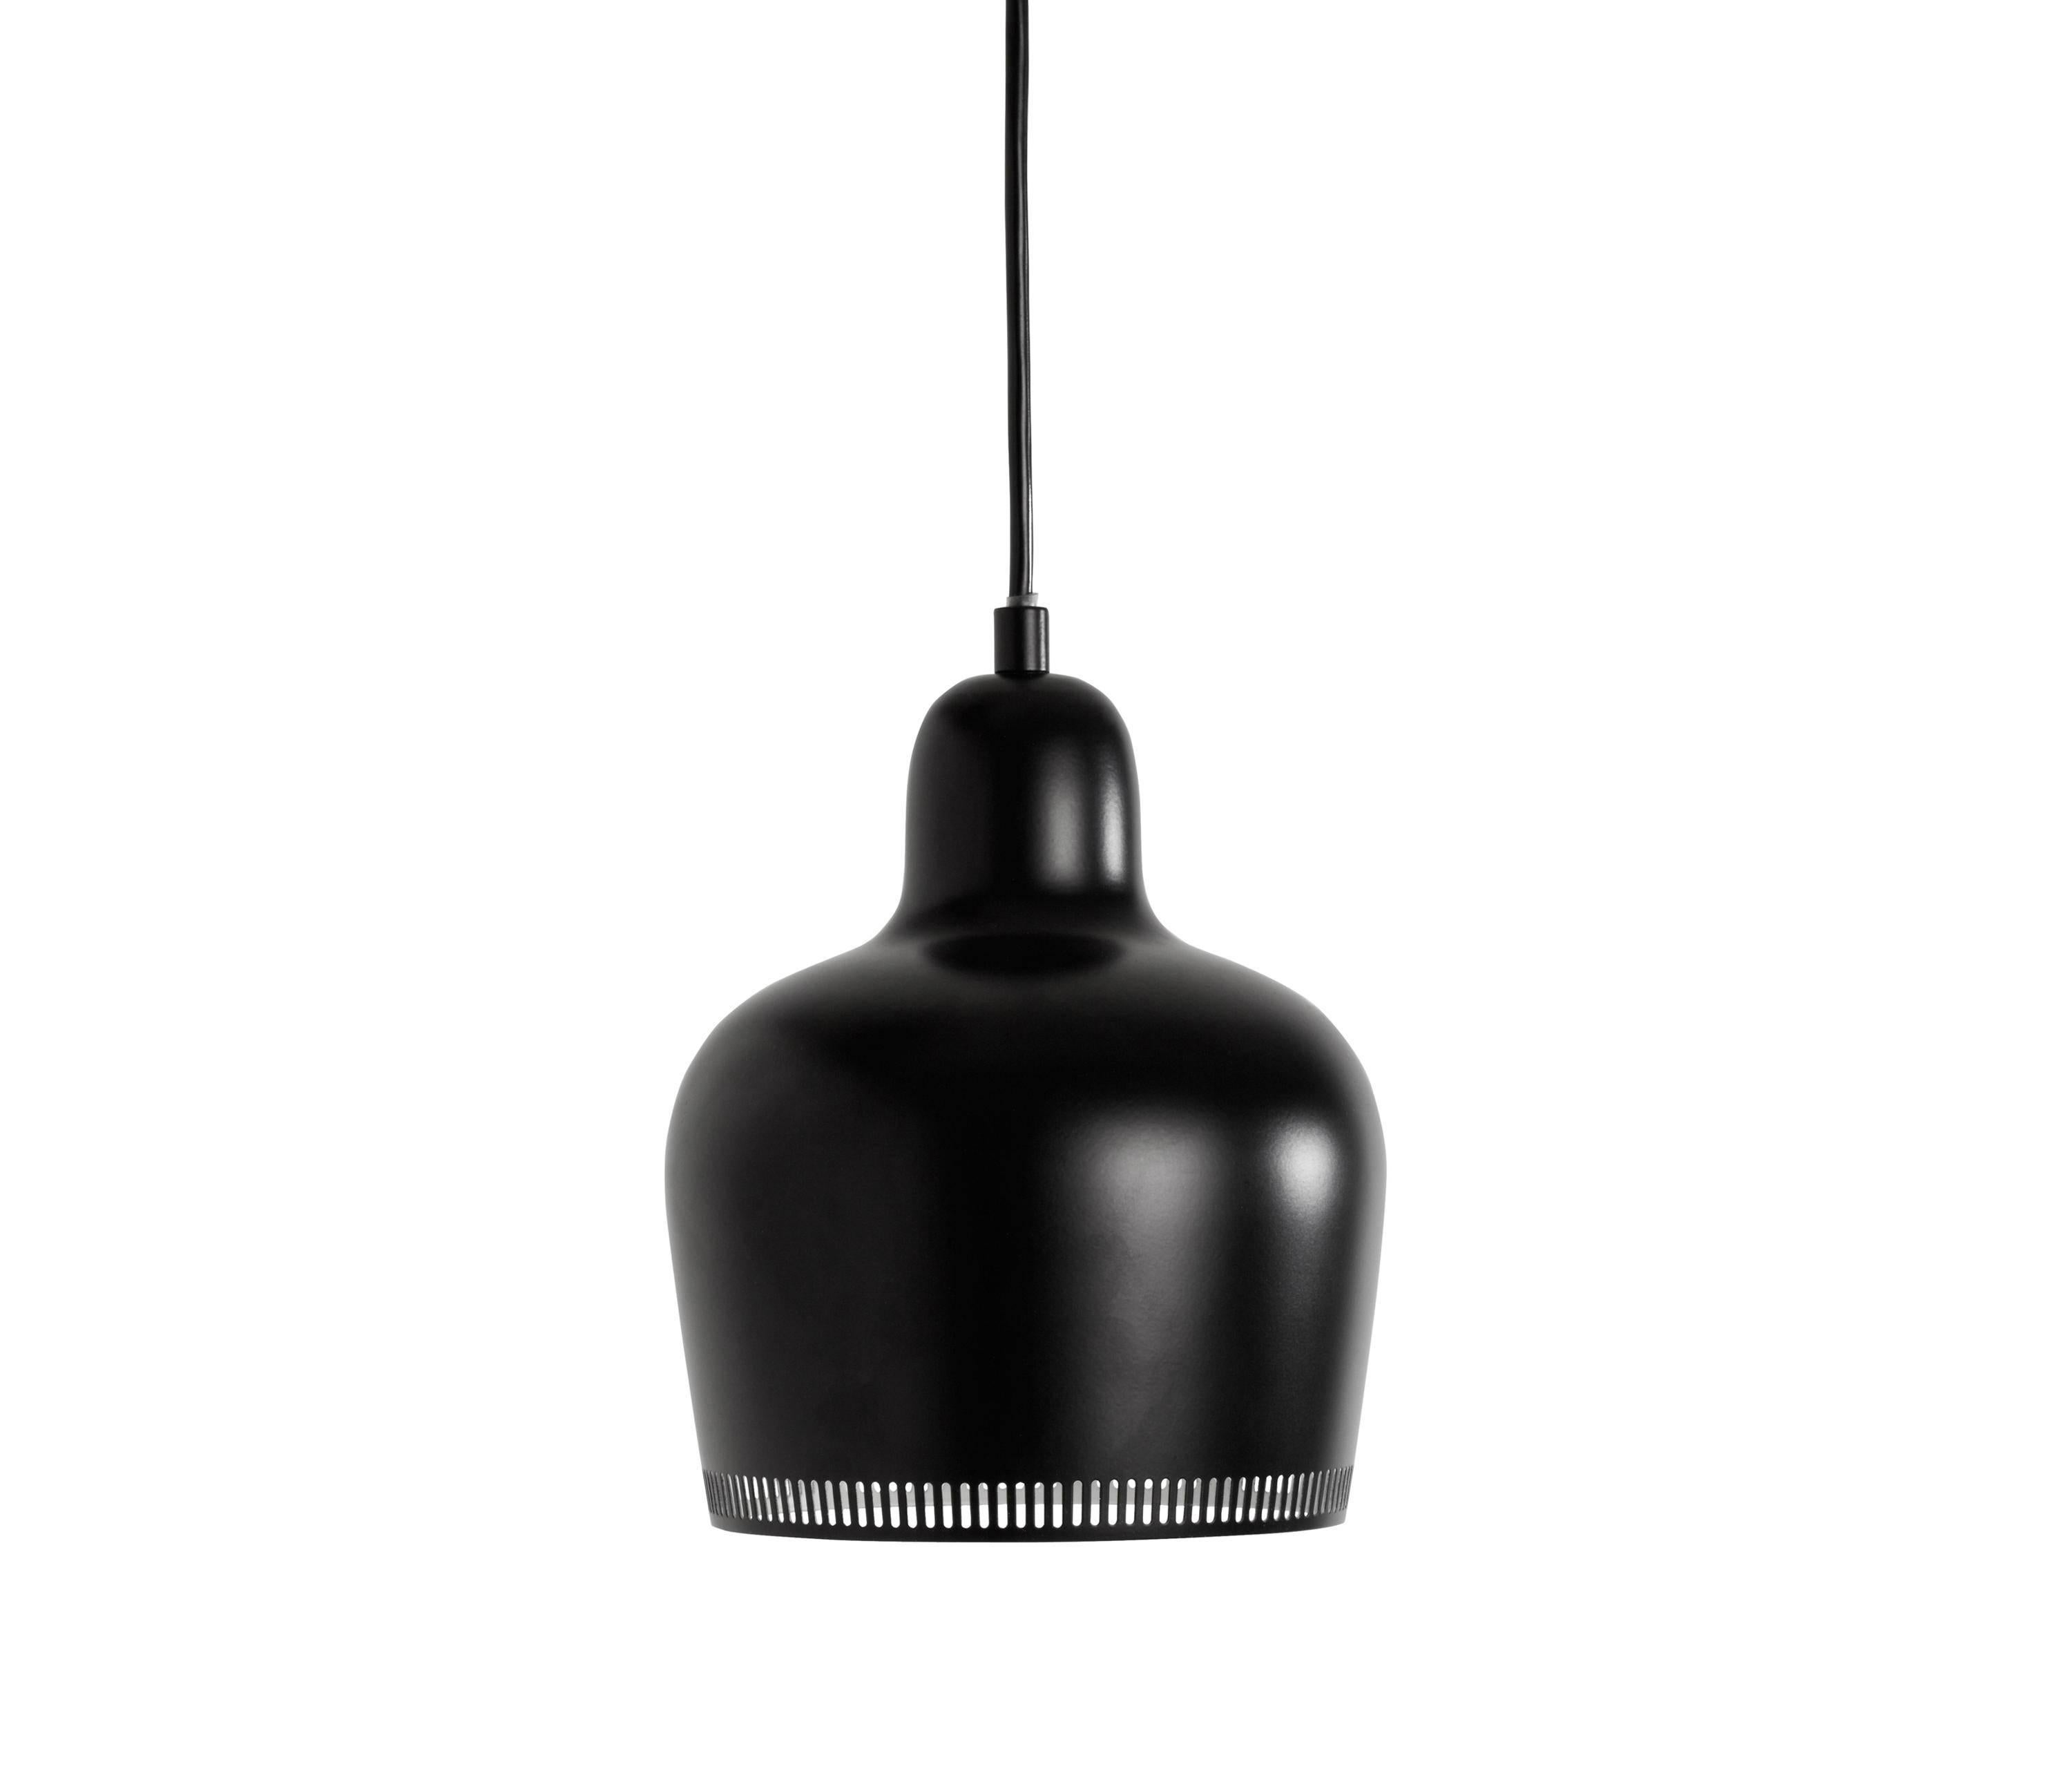 Alvar Aalto A330S 'Golden Bell' black pendant light for Artek. Designed in 1937, this iconic lamp has since remained in near constant production by its original manufacturer, Artek of Finland. Executed in clear lacquered brass with white painted